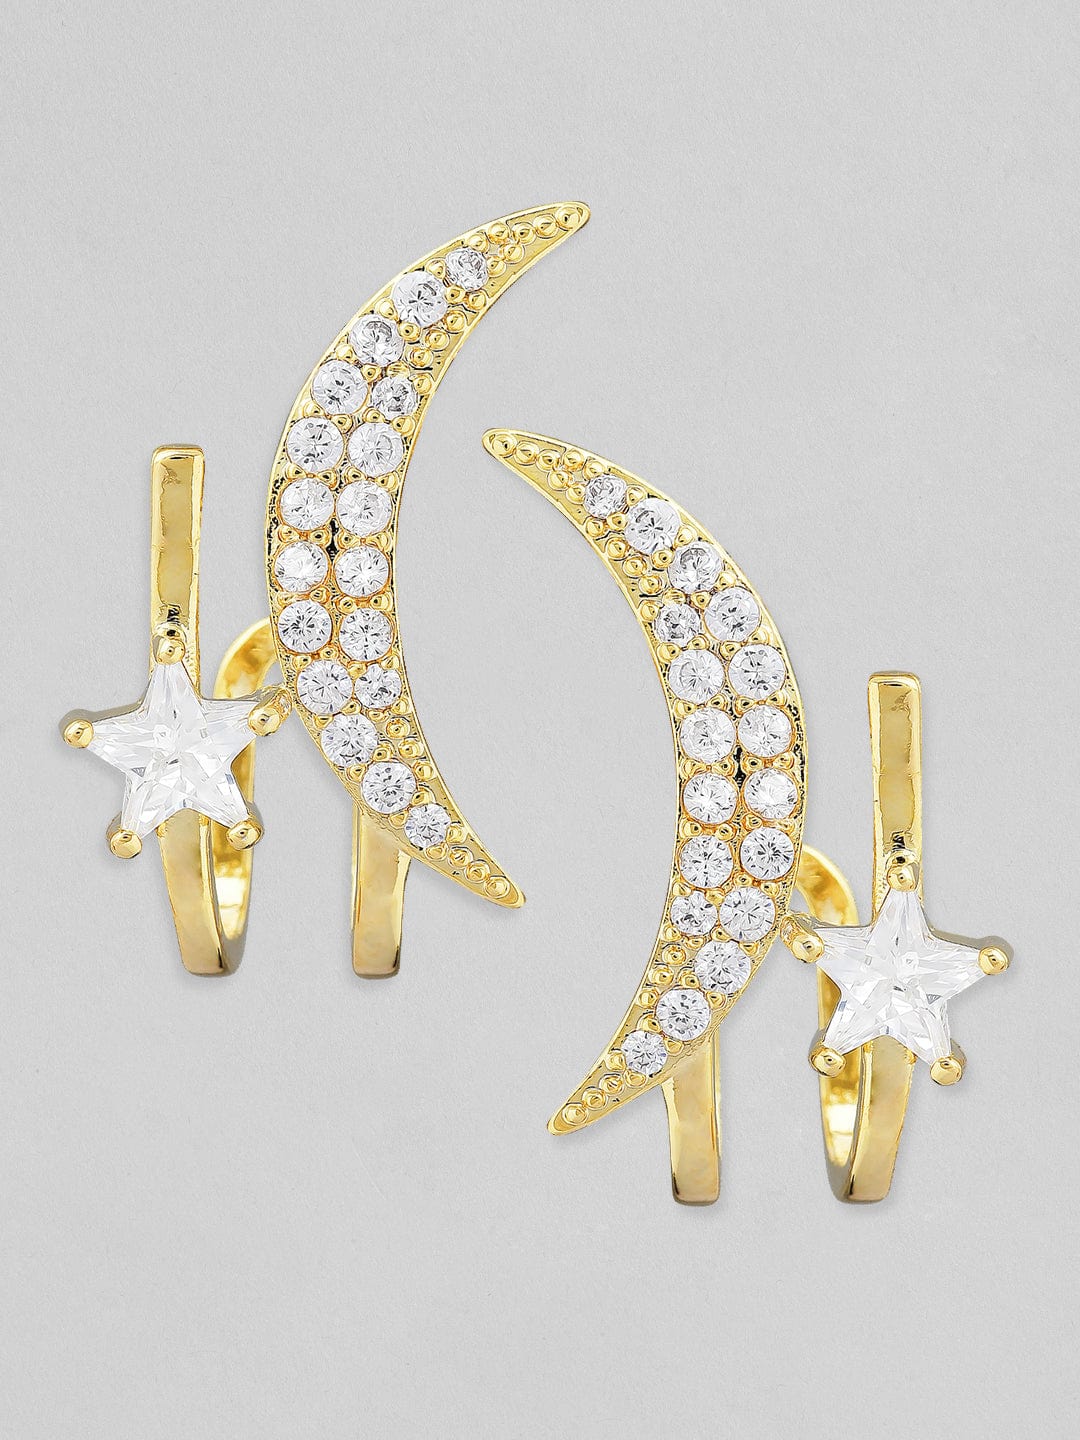 Rubans Voguish Gold-Plated  White Contemporary Stud Earrings Earrings